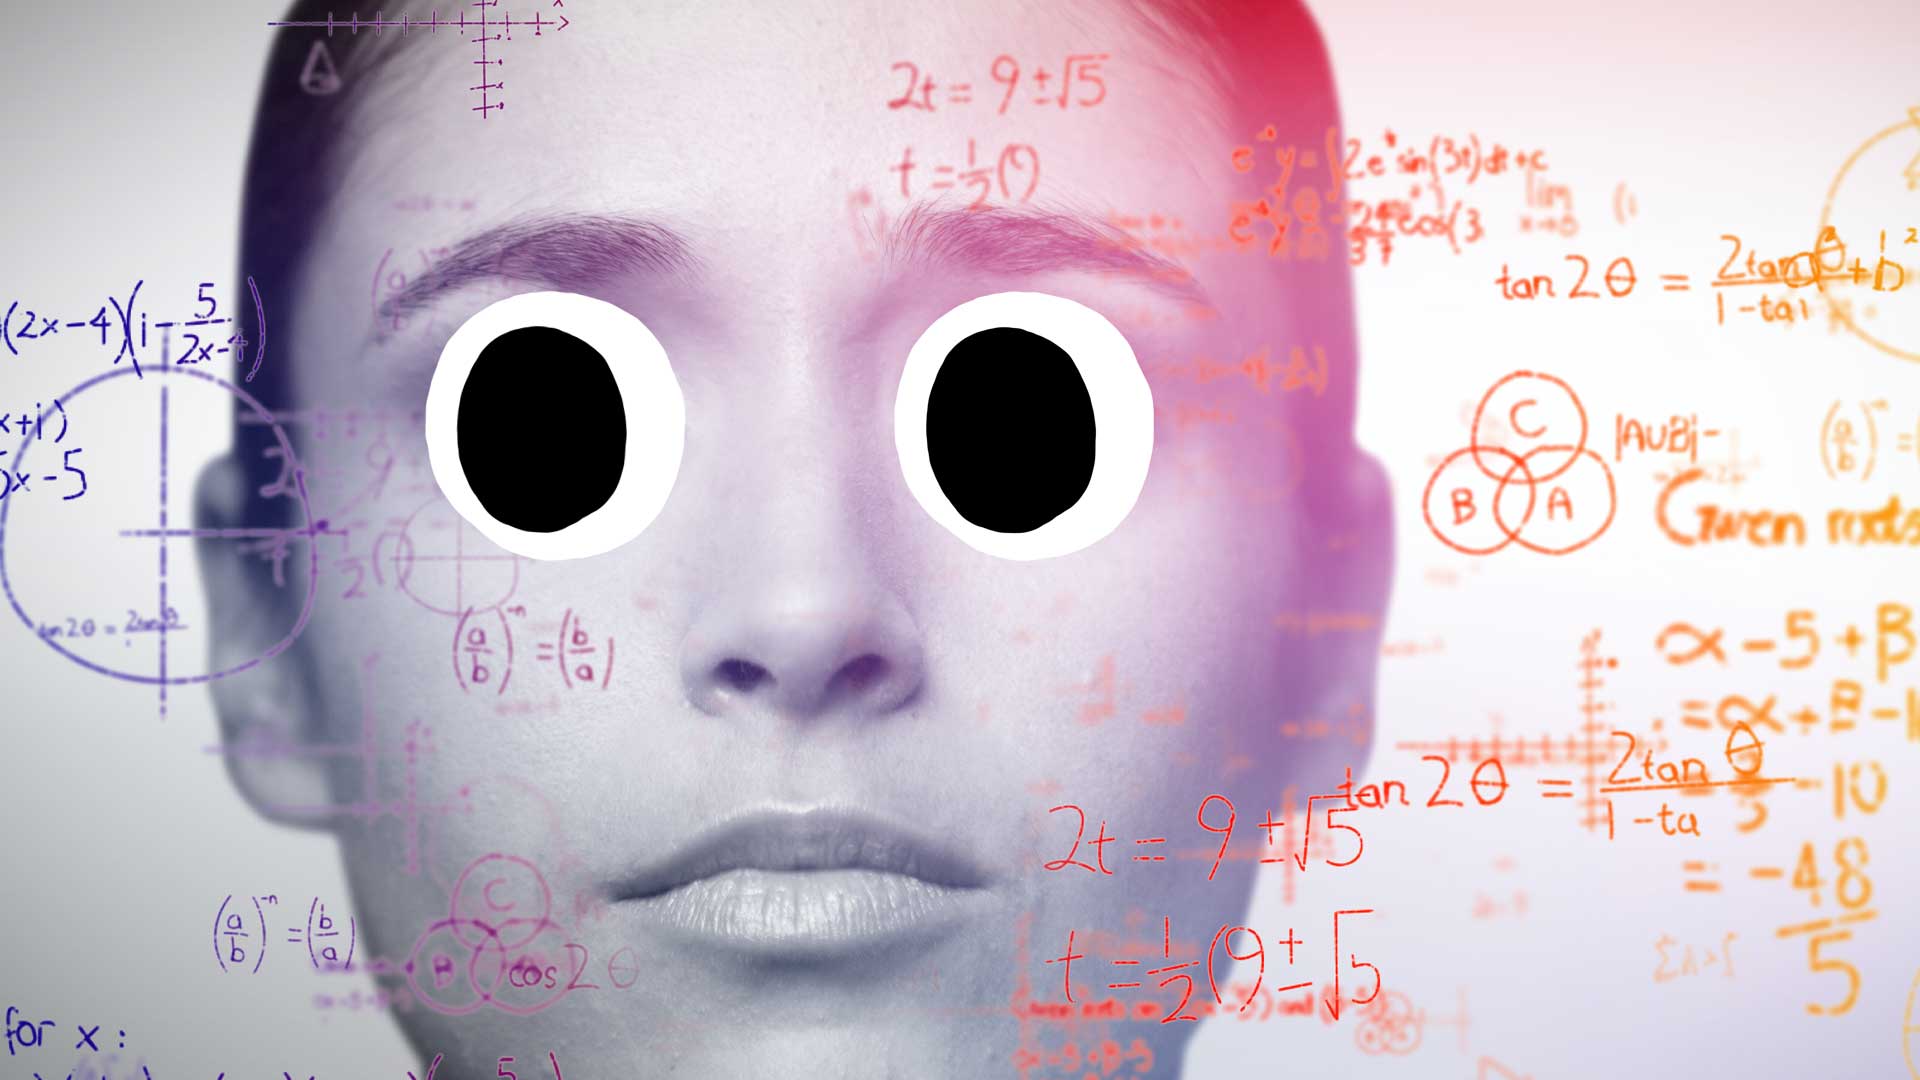 A person looks at a screen of mathematics equations